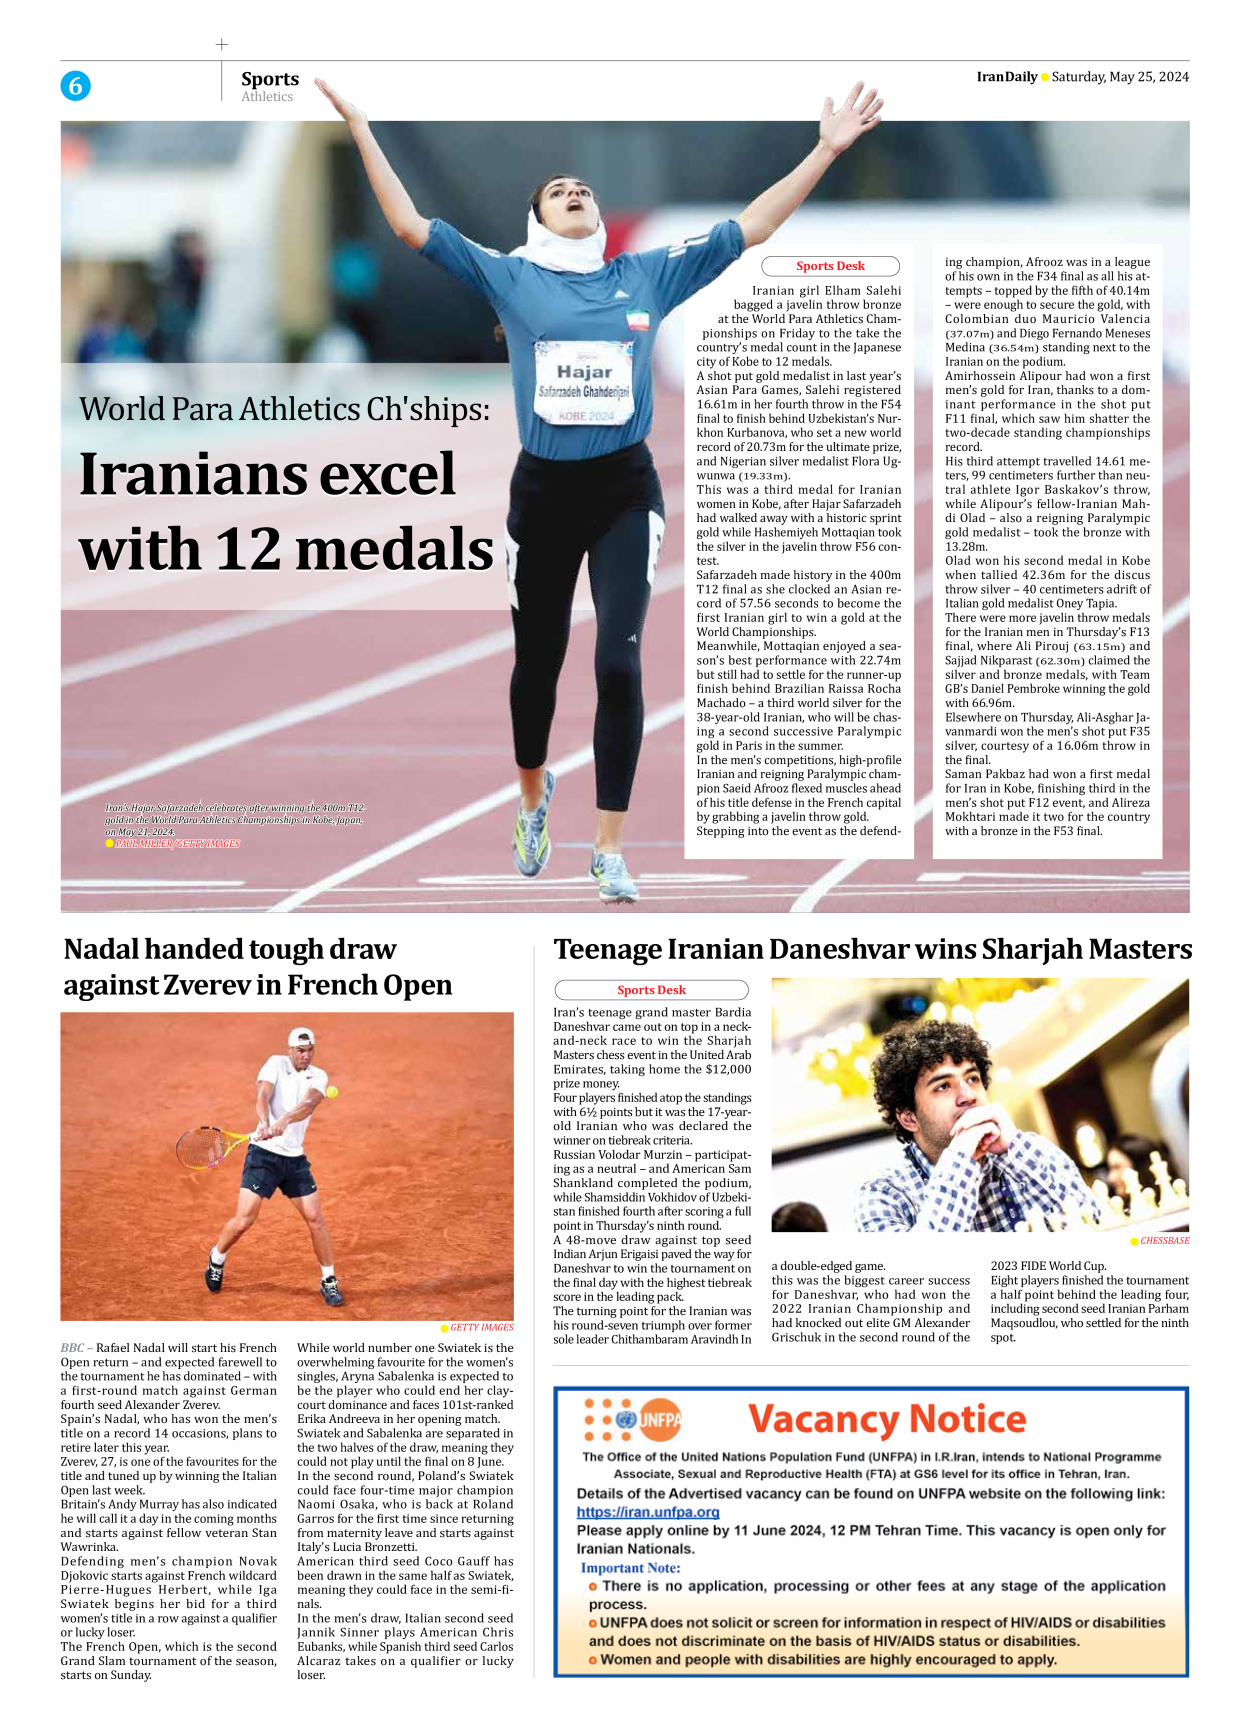 Iran Daily - Number Seven Thousand Five Hundred and Sixty Five - 25 May 2024 - Page 6